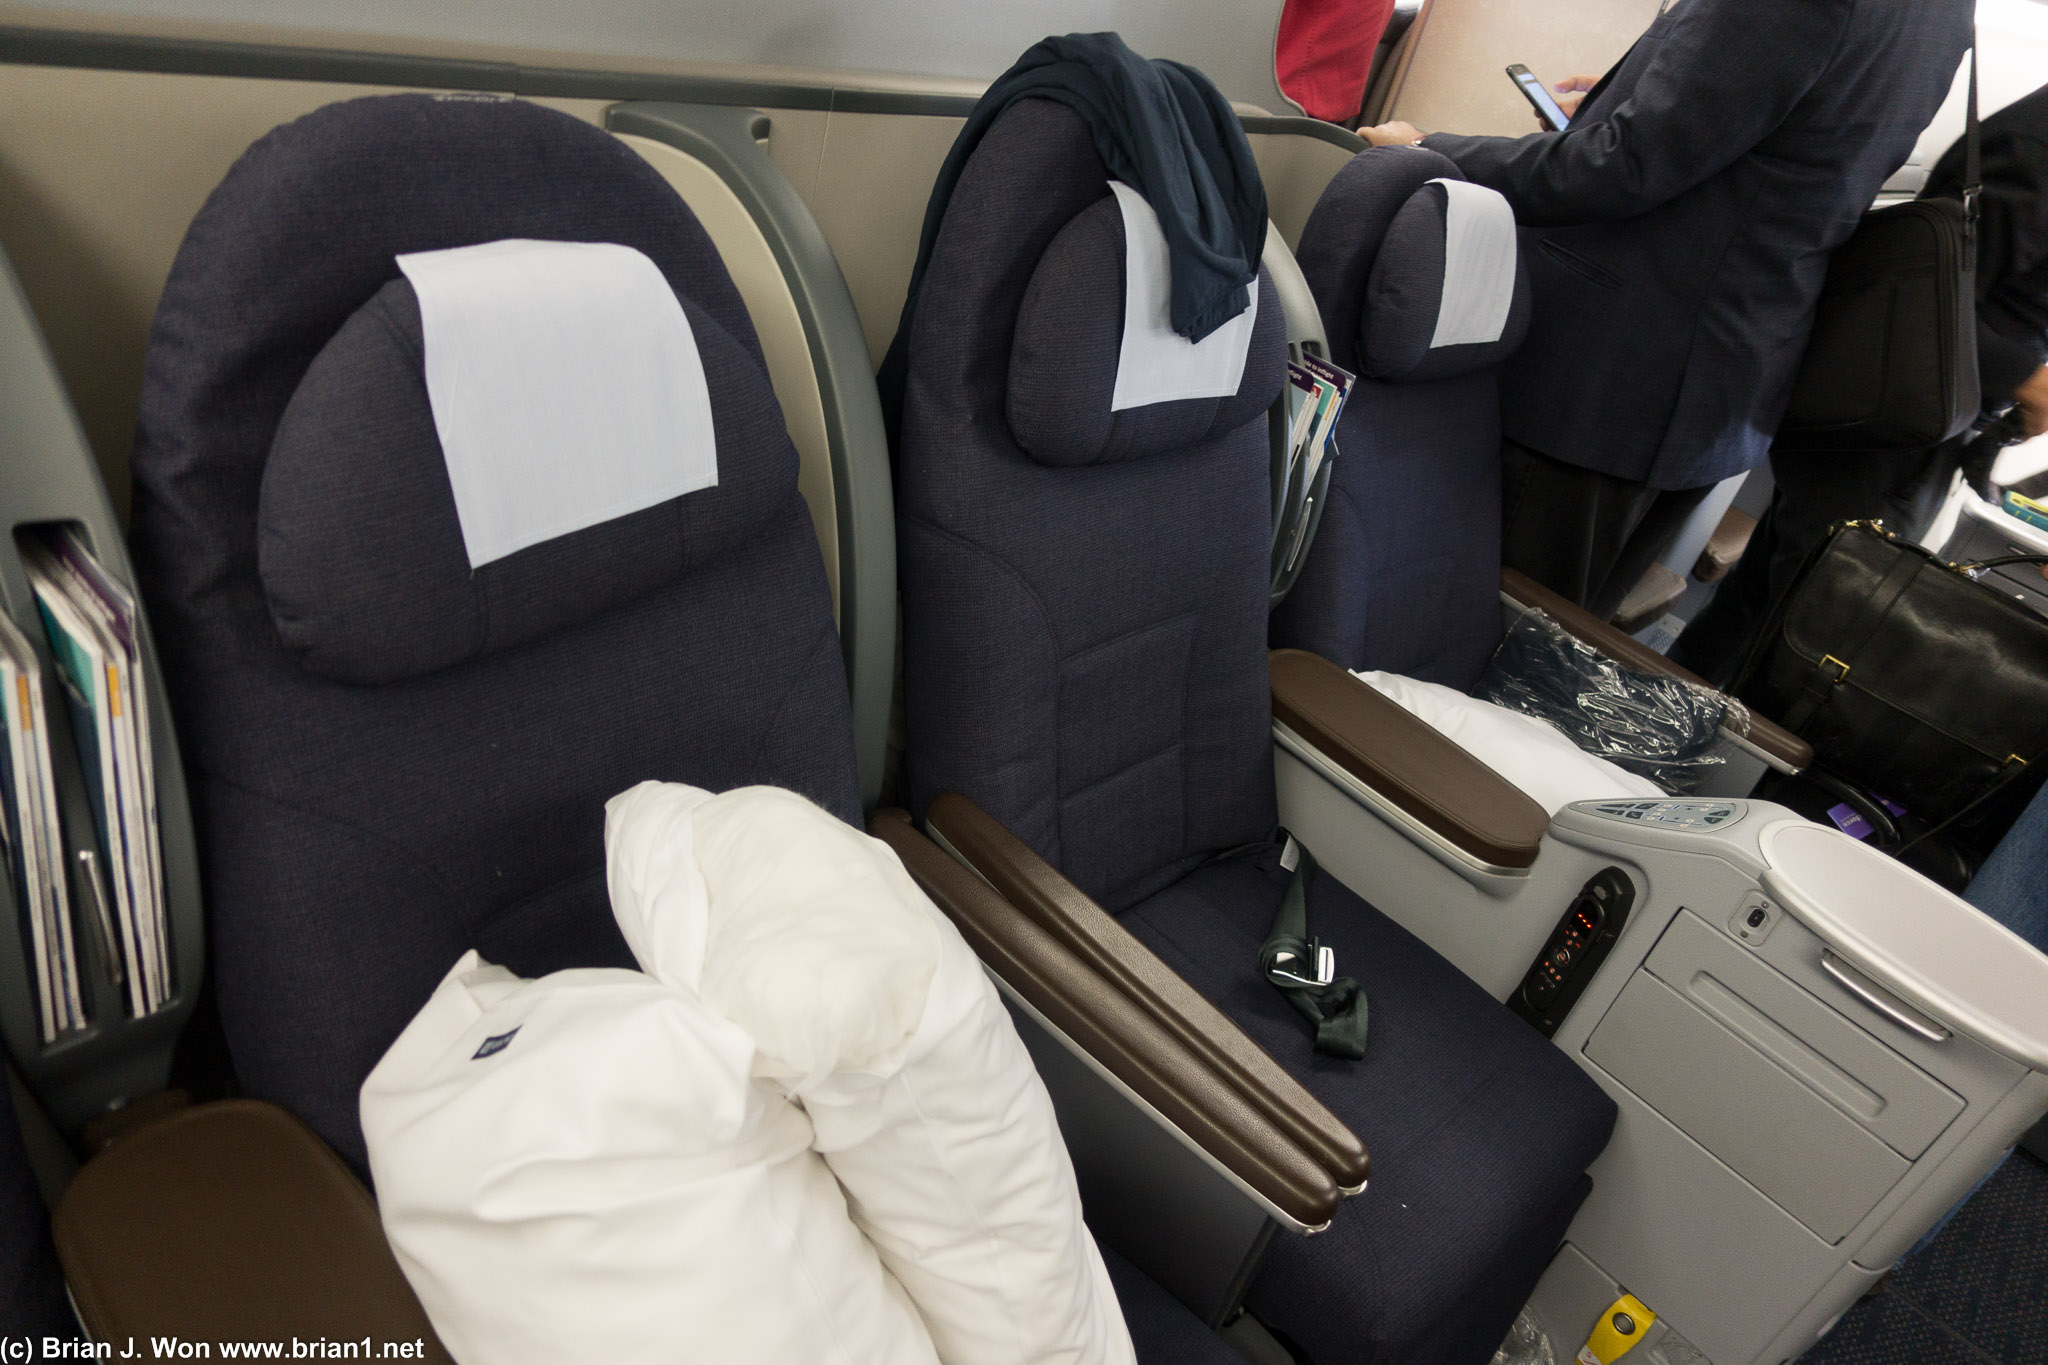 2-4-2 seating is cramped for a business class product.